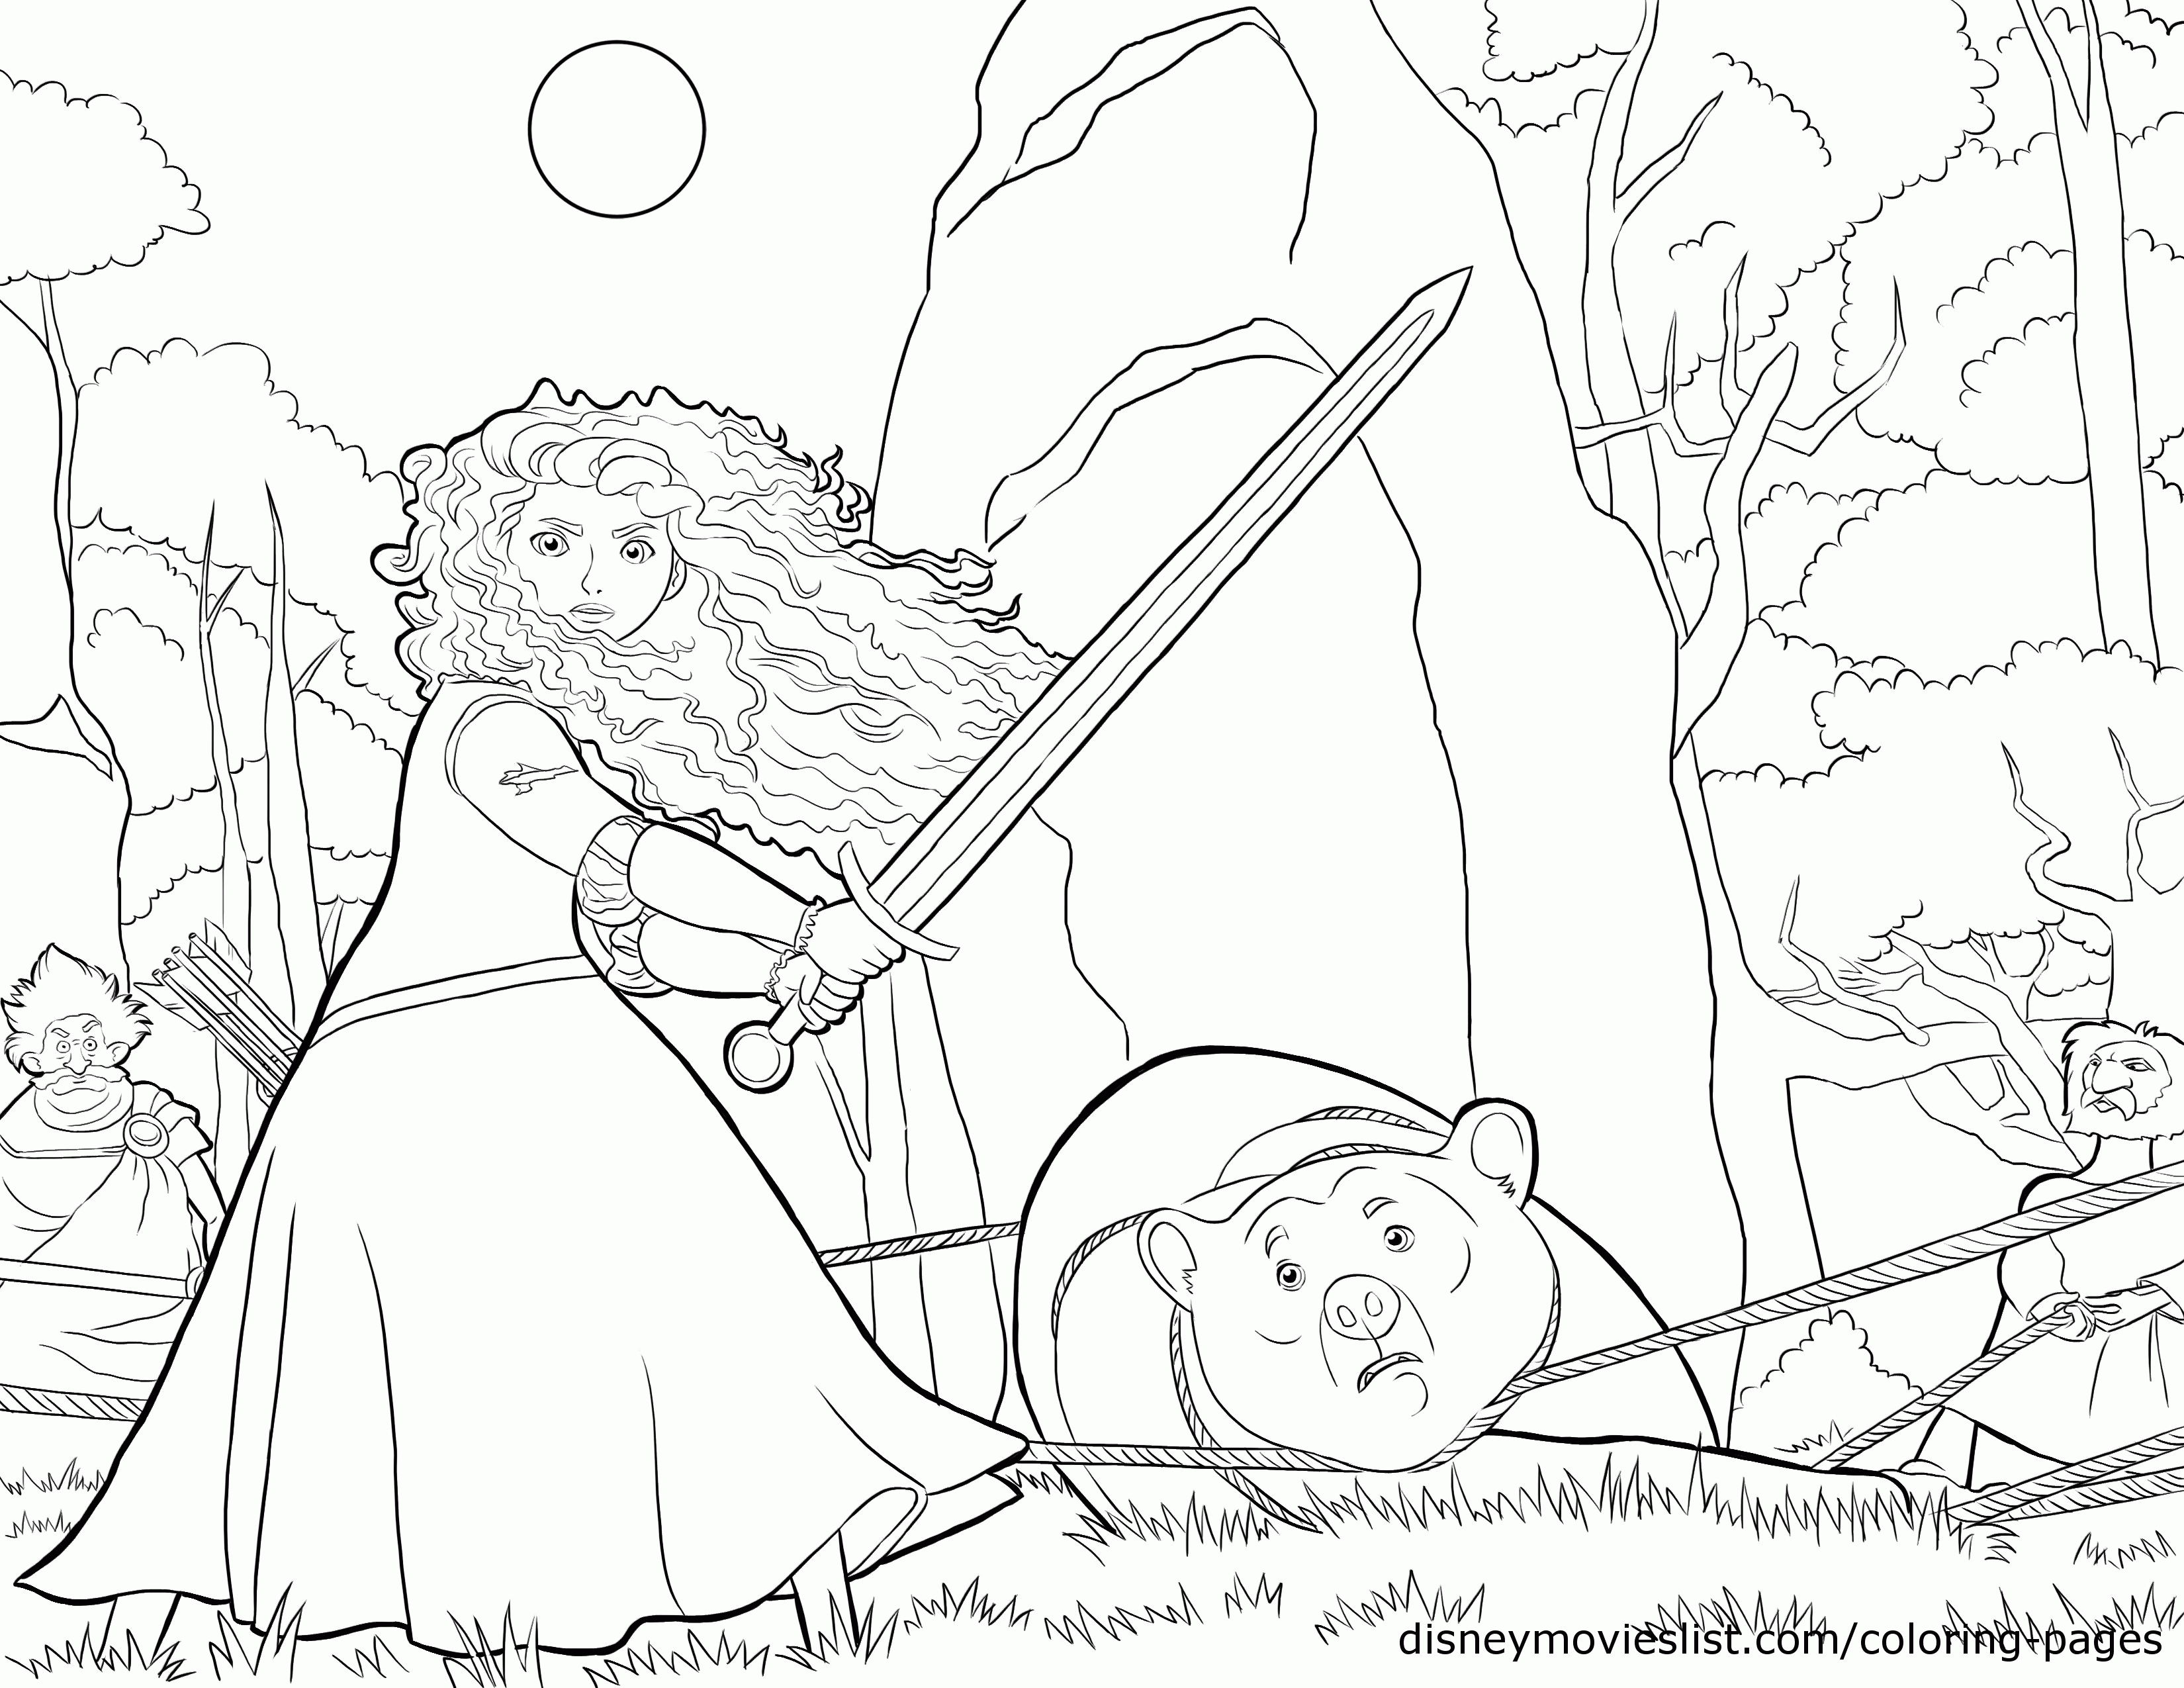 Brave Coloring Pages (19 Pictures) - Colorine.net | 15256